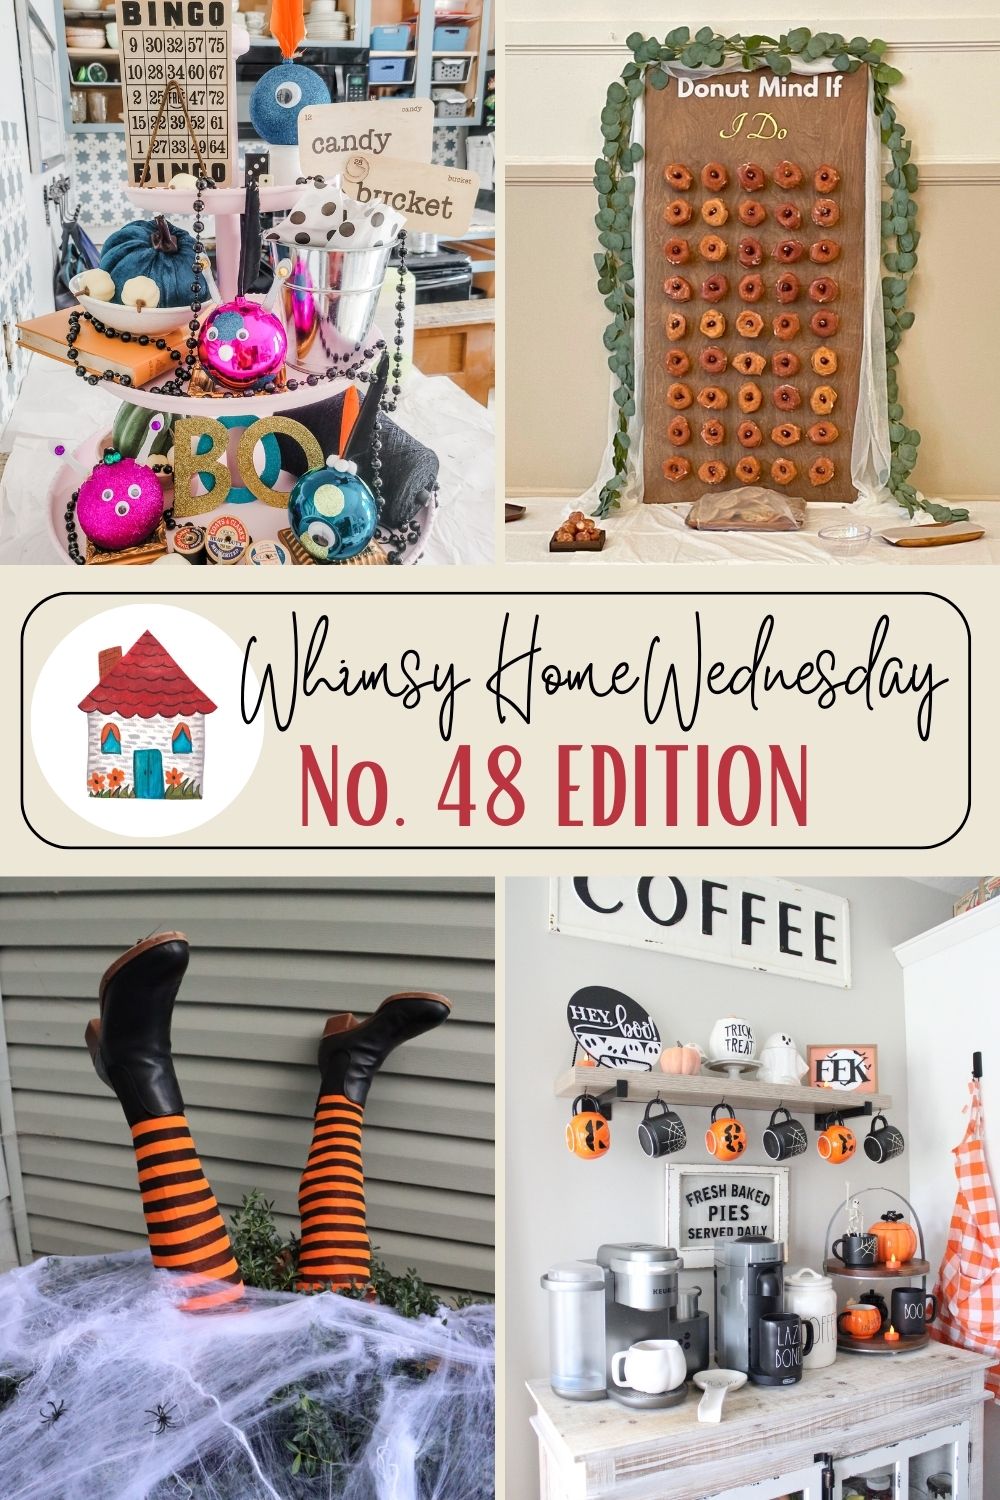 Join us on Whimsy Home Wednesday Blog Link Party No. 48 and see host projects, the features from the previous week and link up your posts!